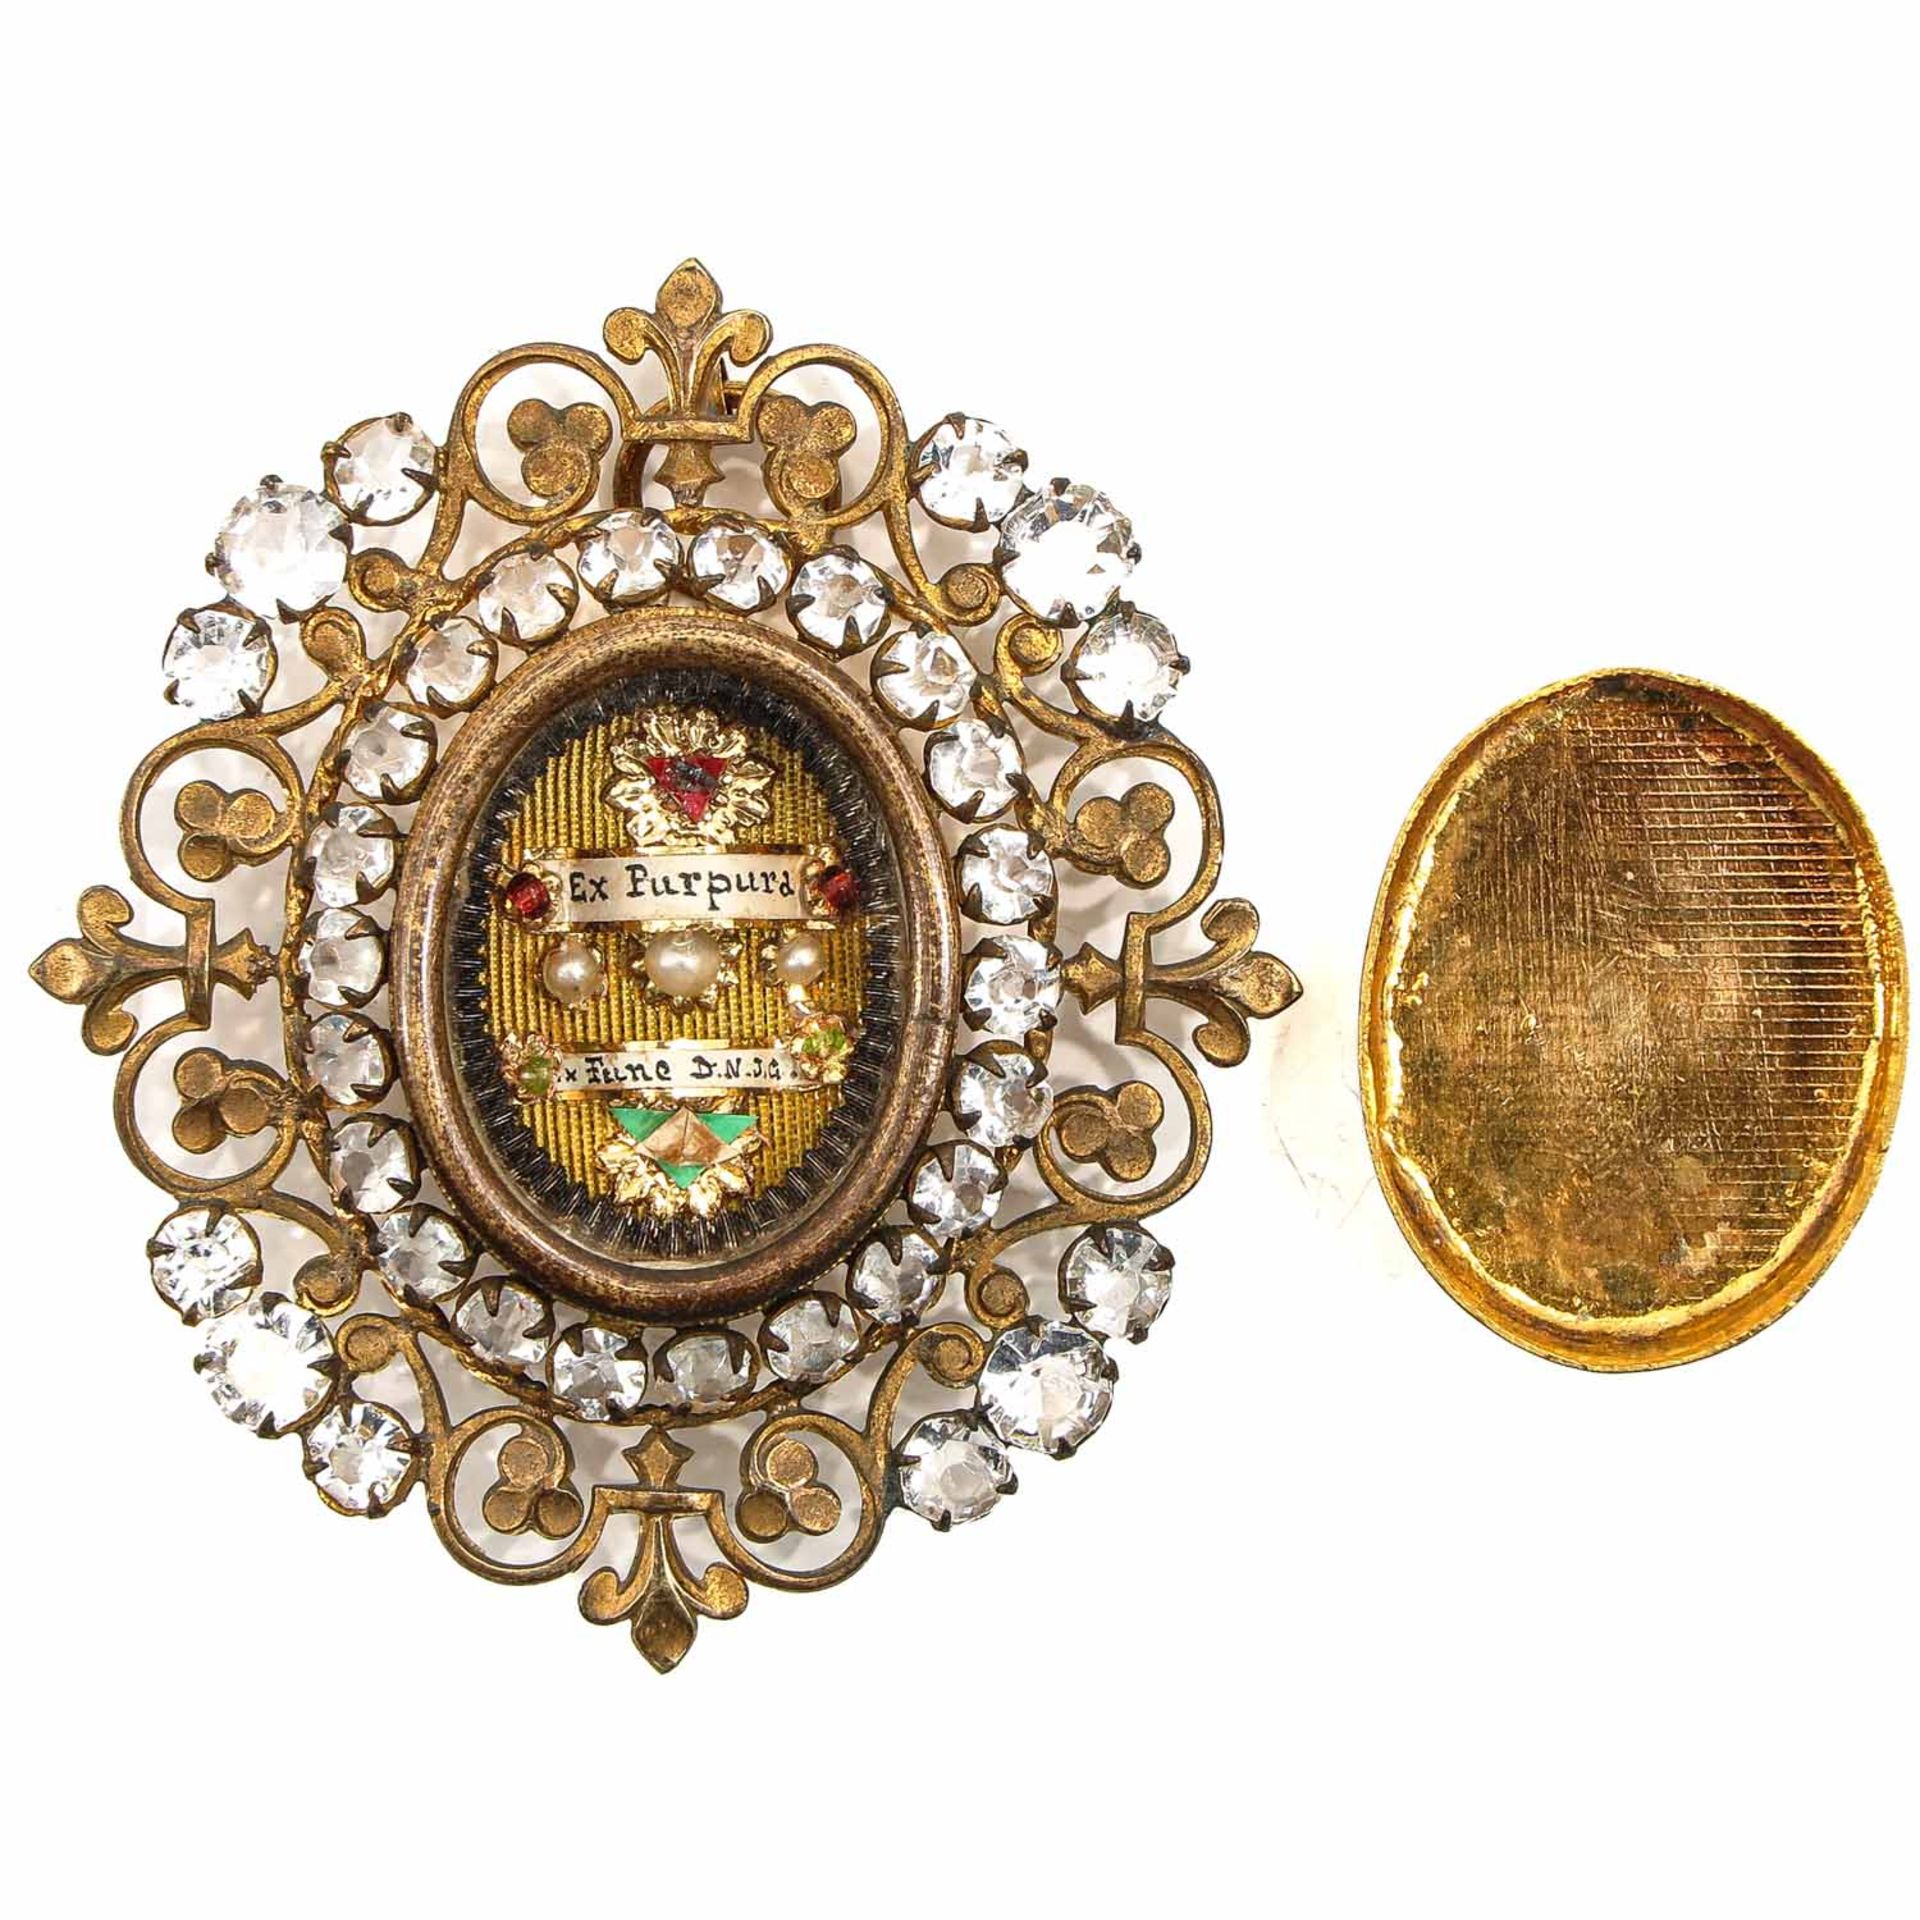 A Relic Holder with Relic from Ex Purpura and Ex Fune DNJC